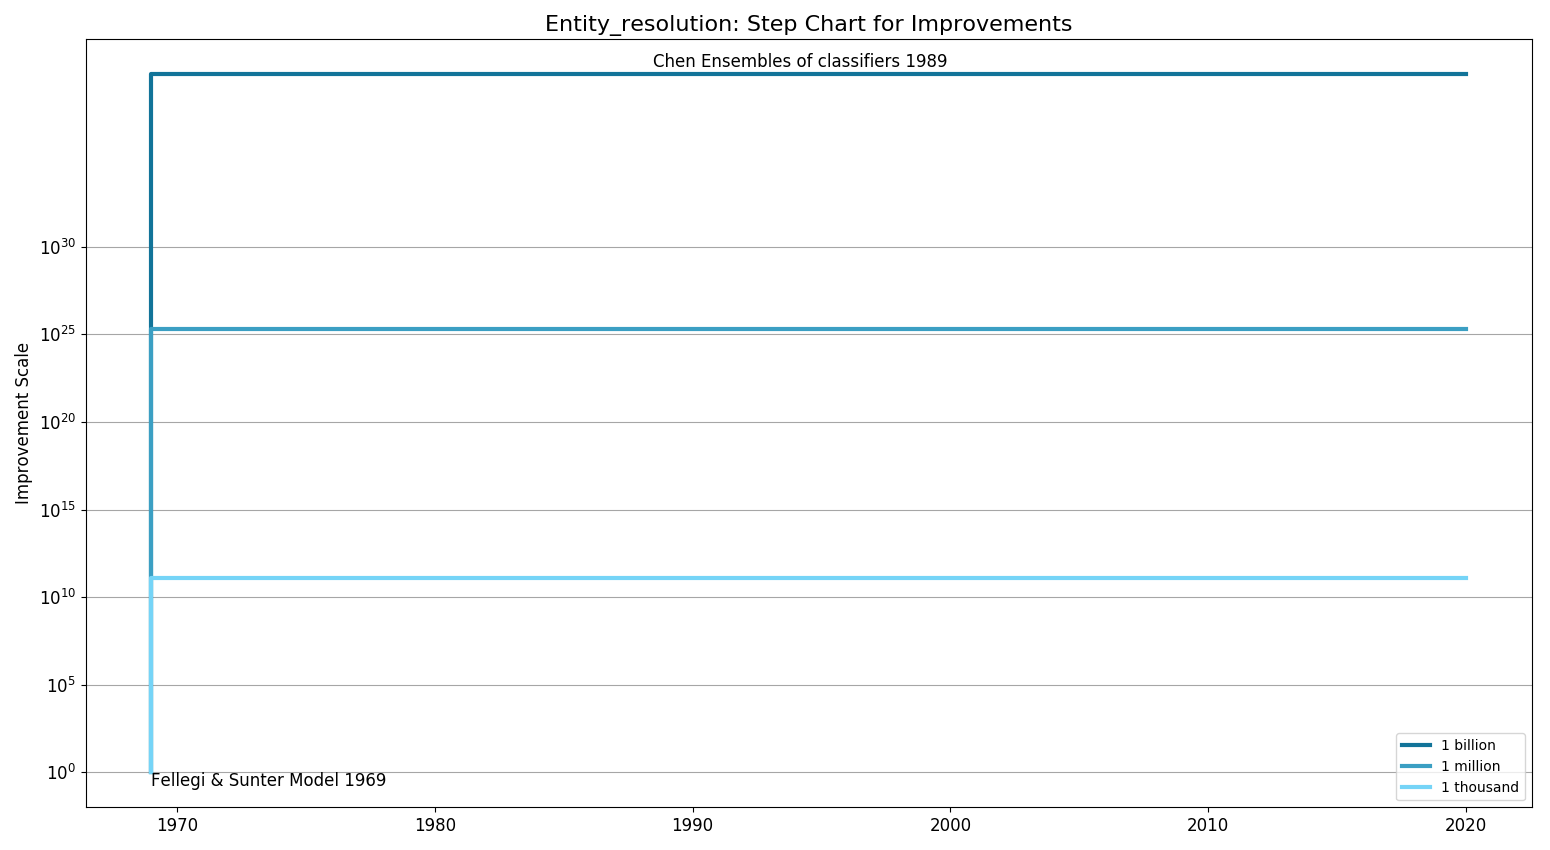 Entity resolutionStepChart.png